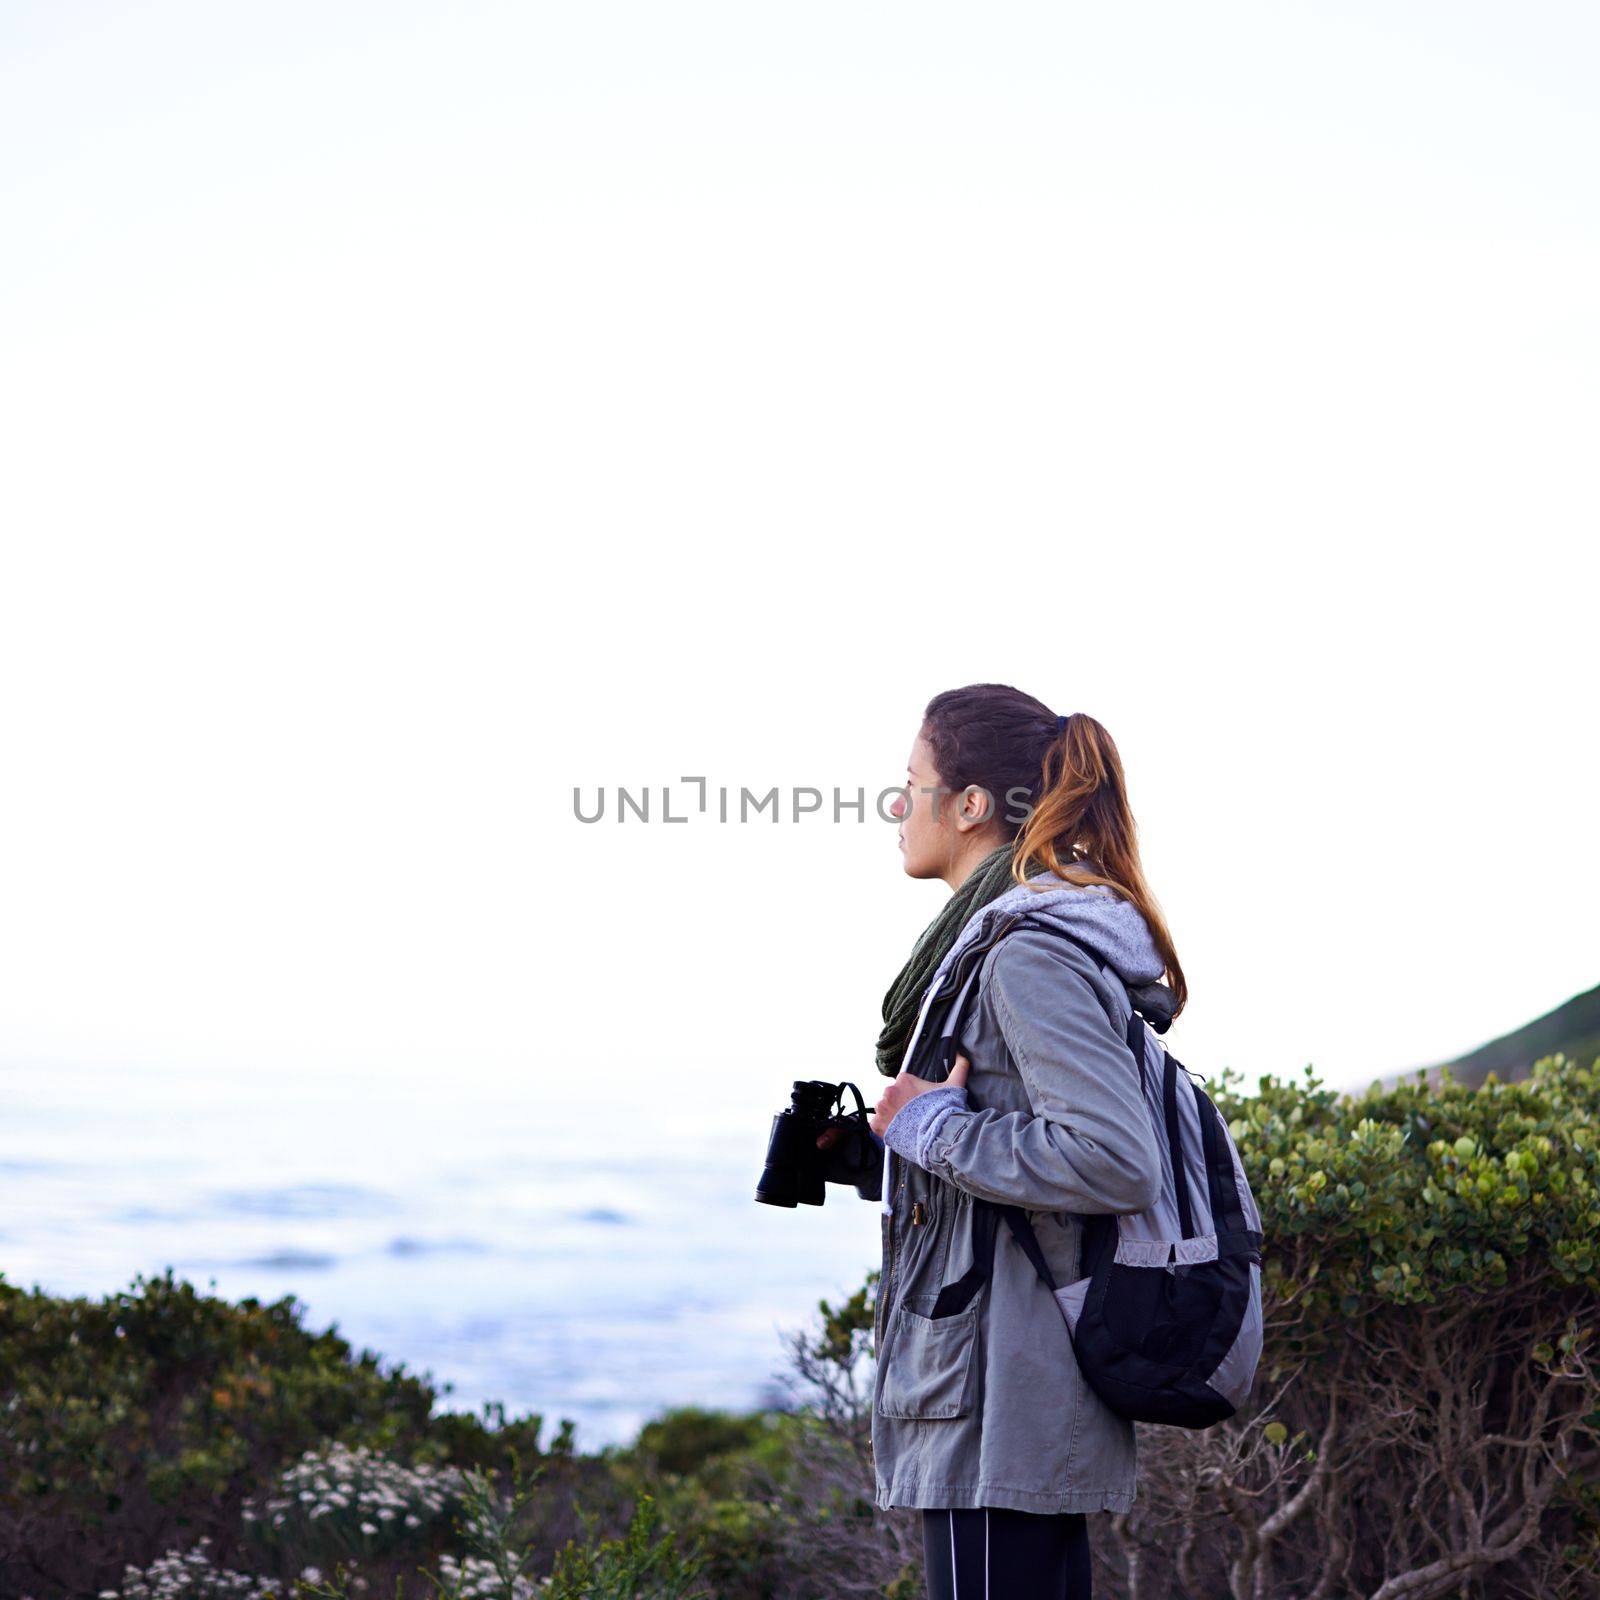 Appreciating the beauty of nature. a young woman using binoculars while out hiking. by YuriArcurs